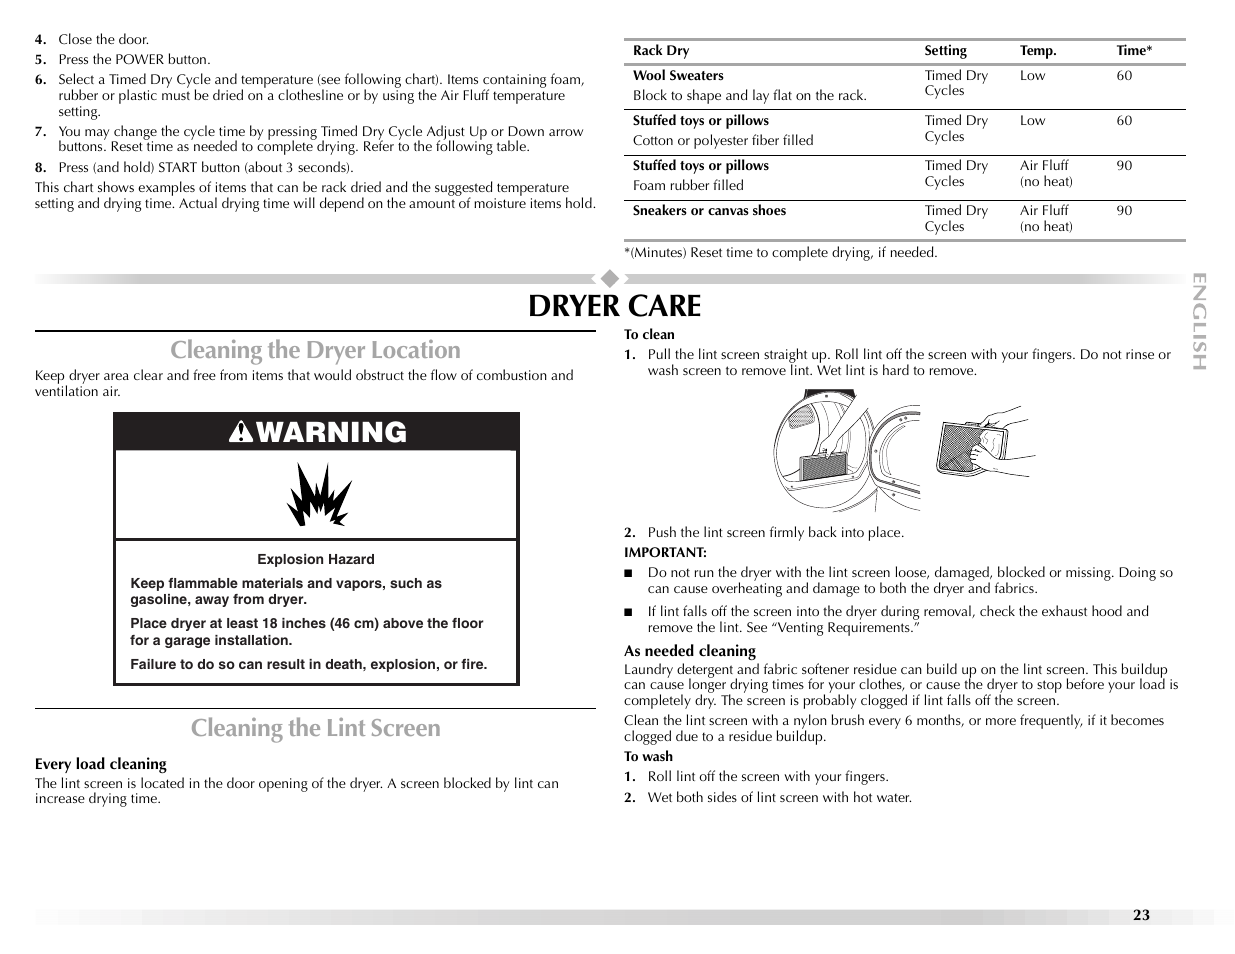 Dryer care, Warning, Cleaning the dryer location | Cleaning the lint screen | Maytag Epic z W10112943A User Manual | Page 23 / 84